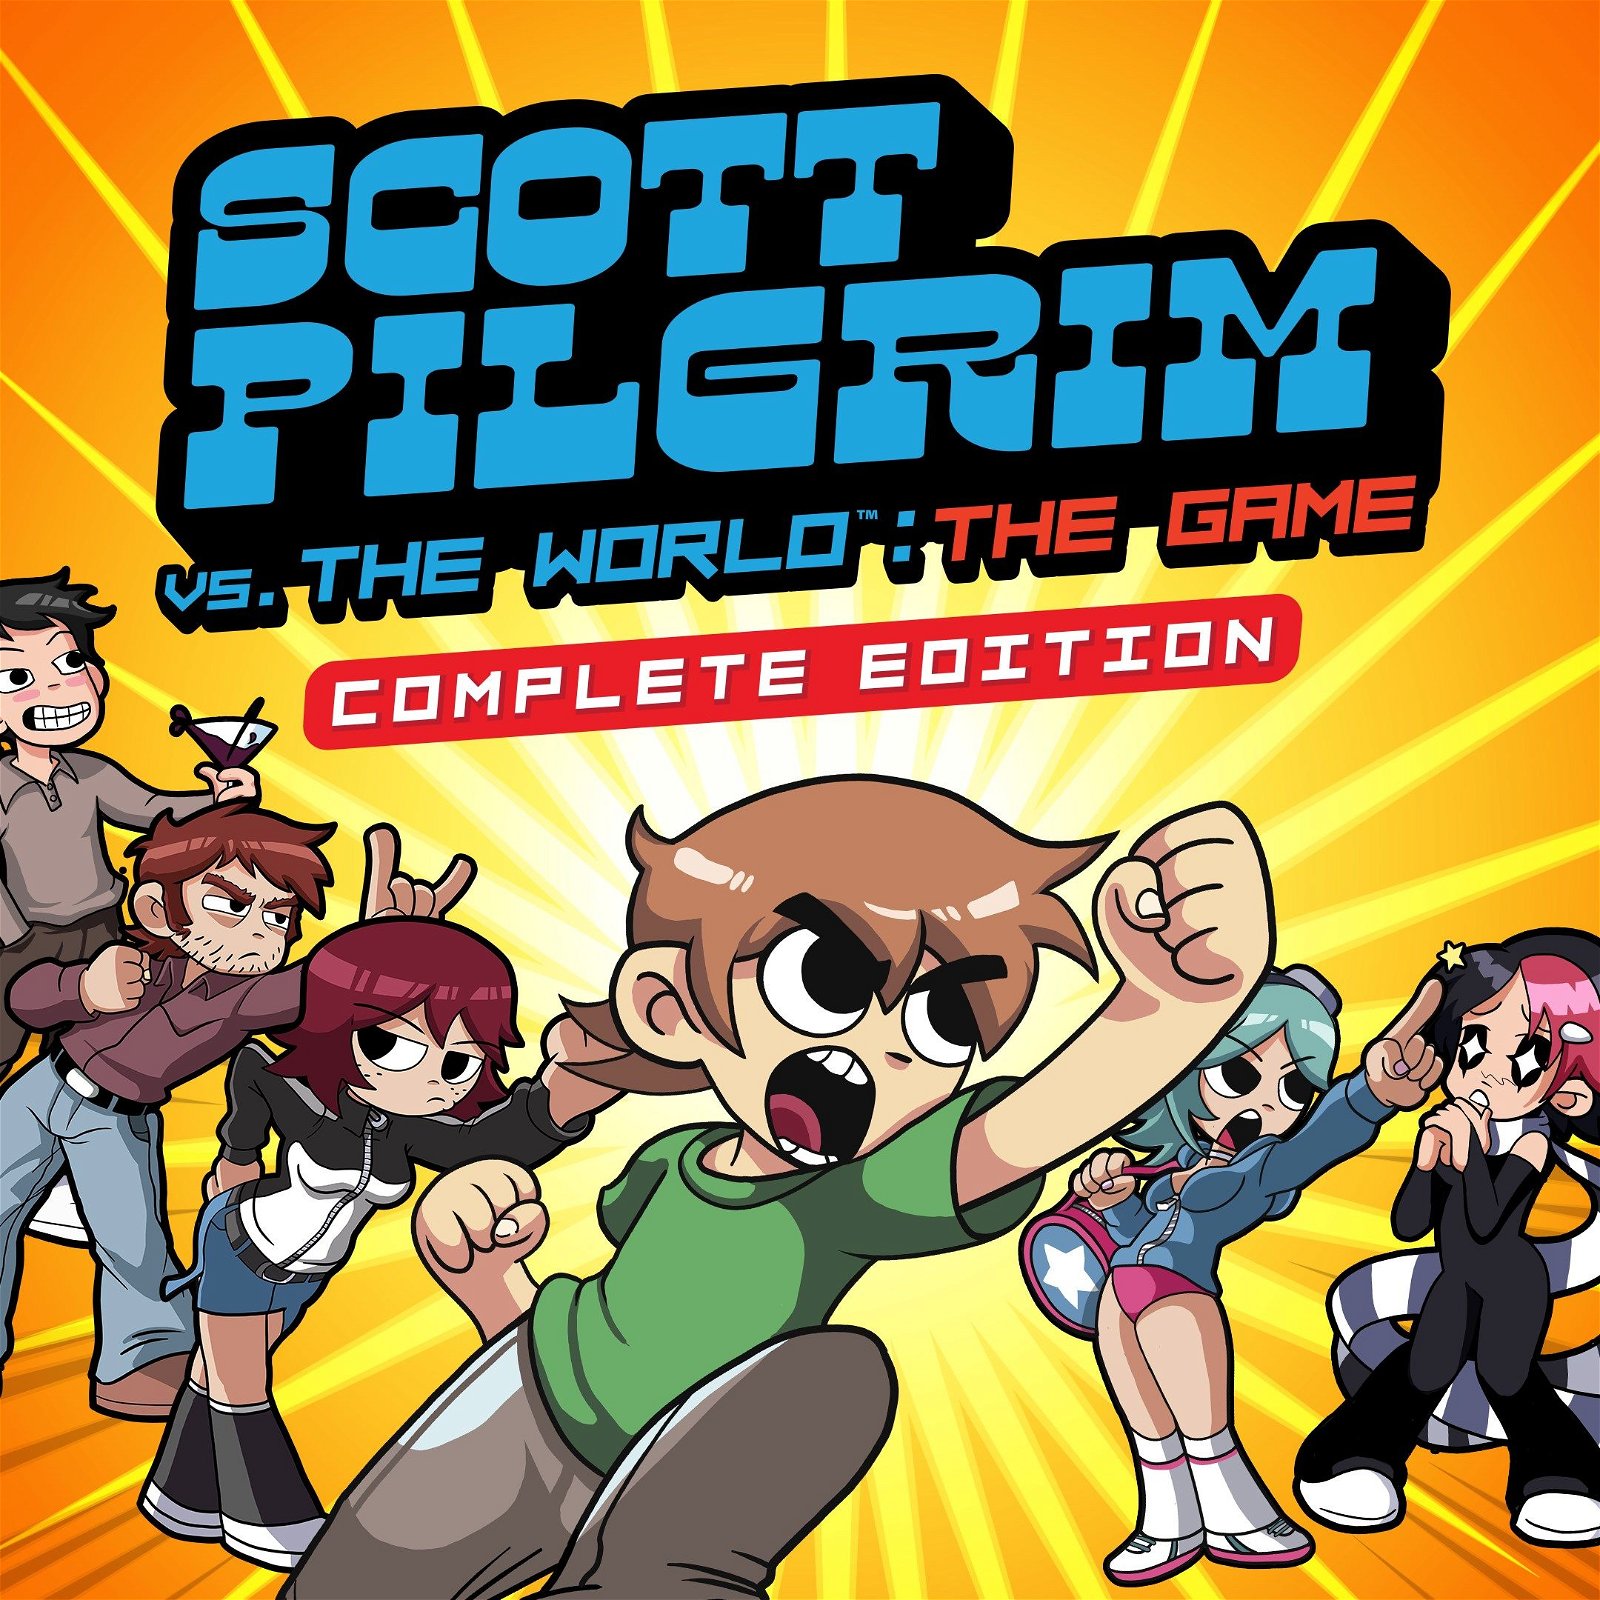 Image of Scott Pilgrim vs. The World: The Game – Complete Edition